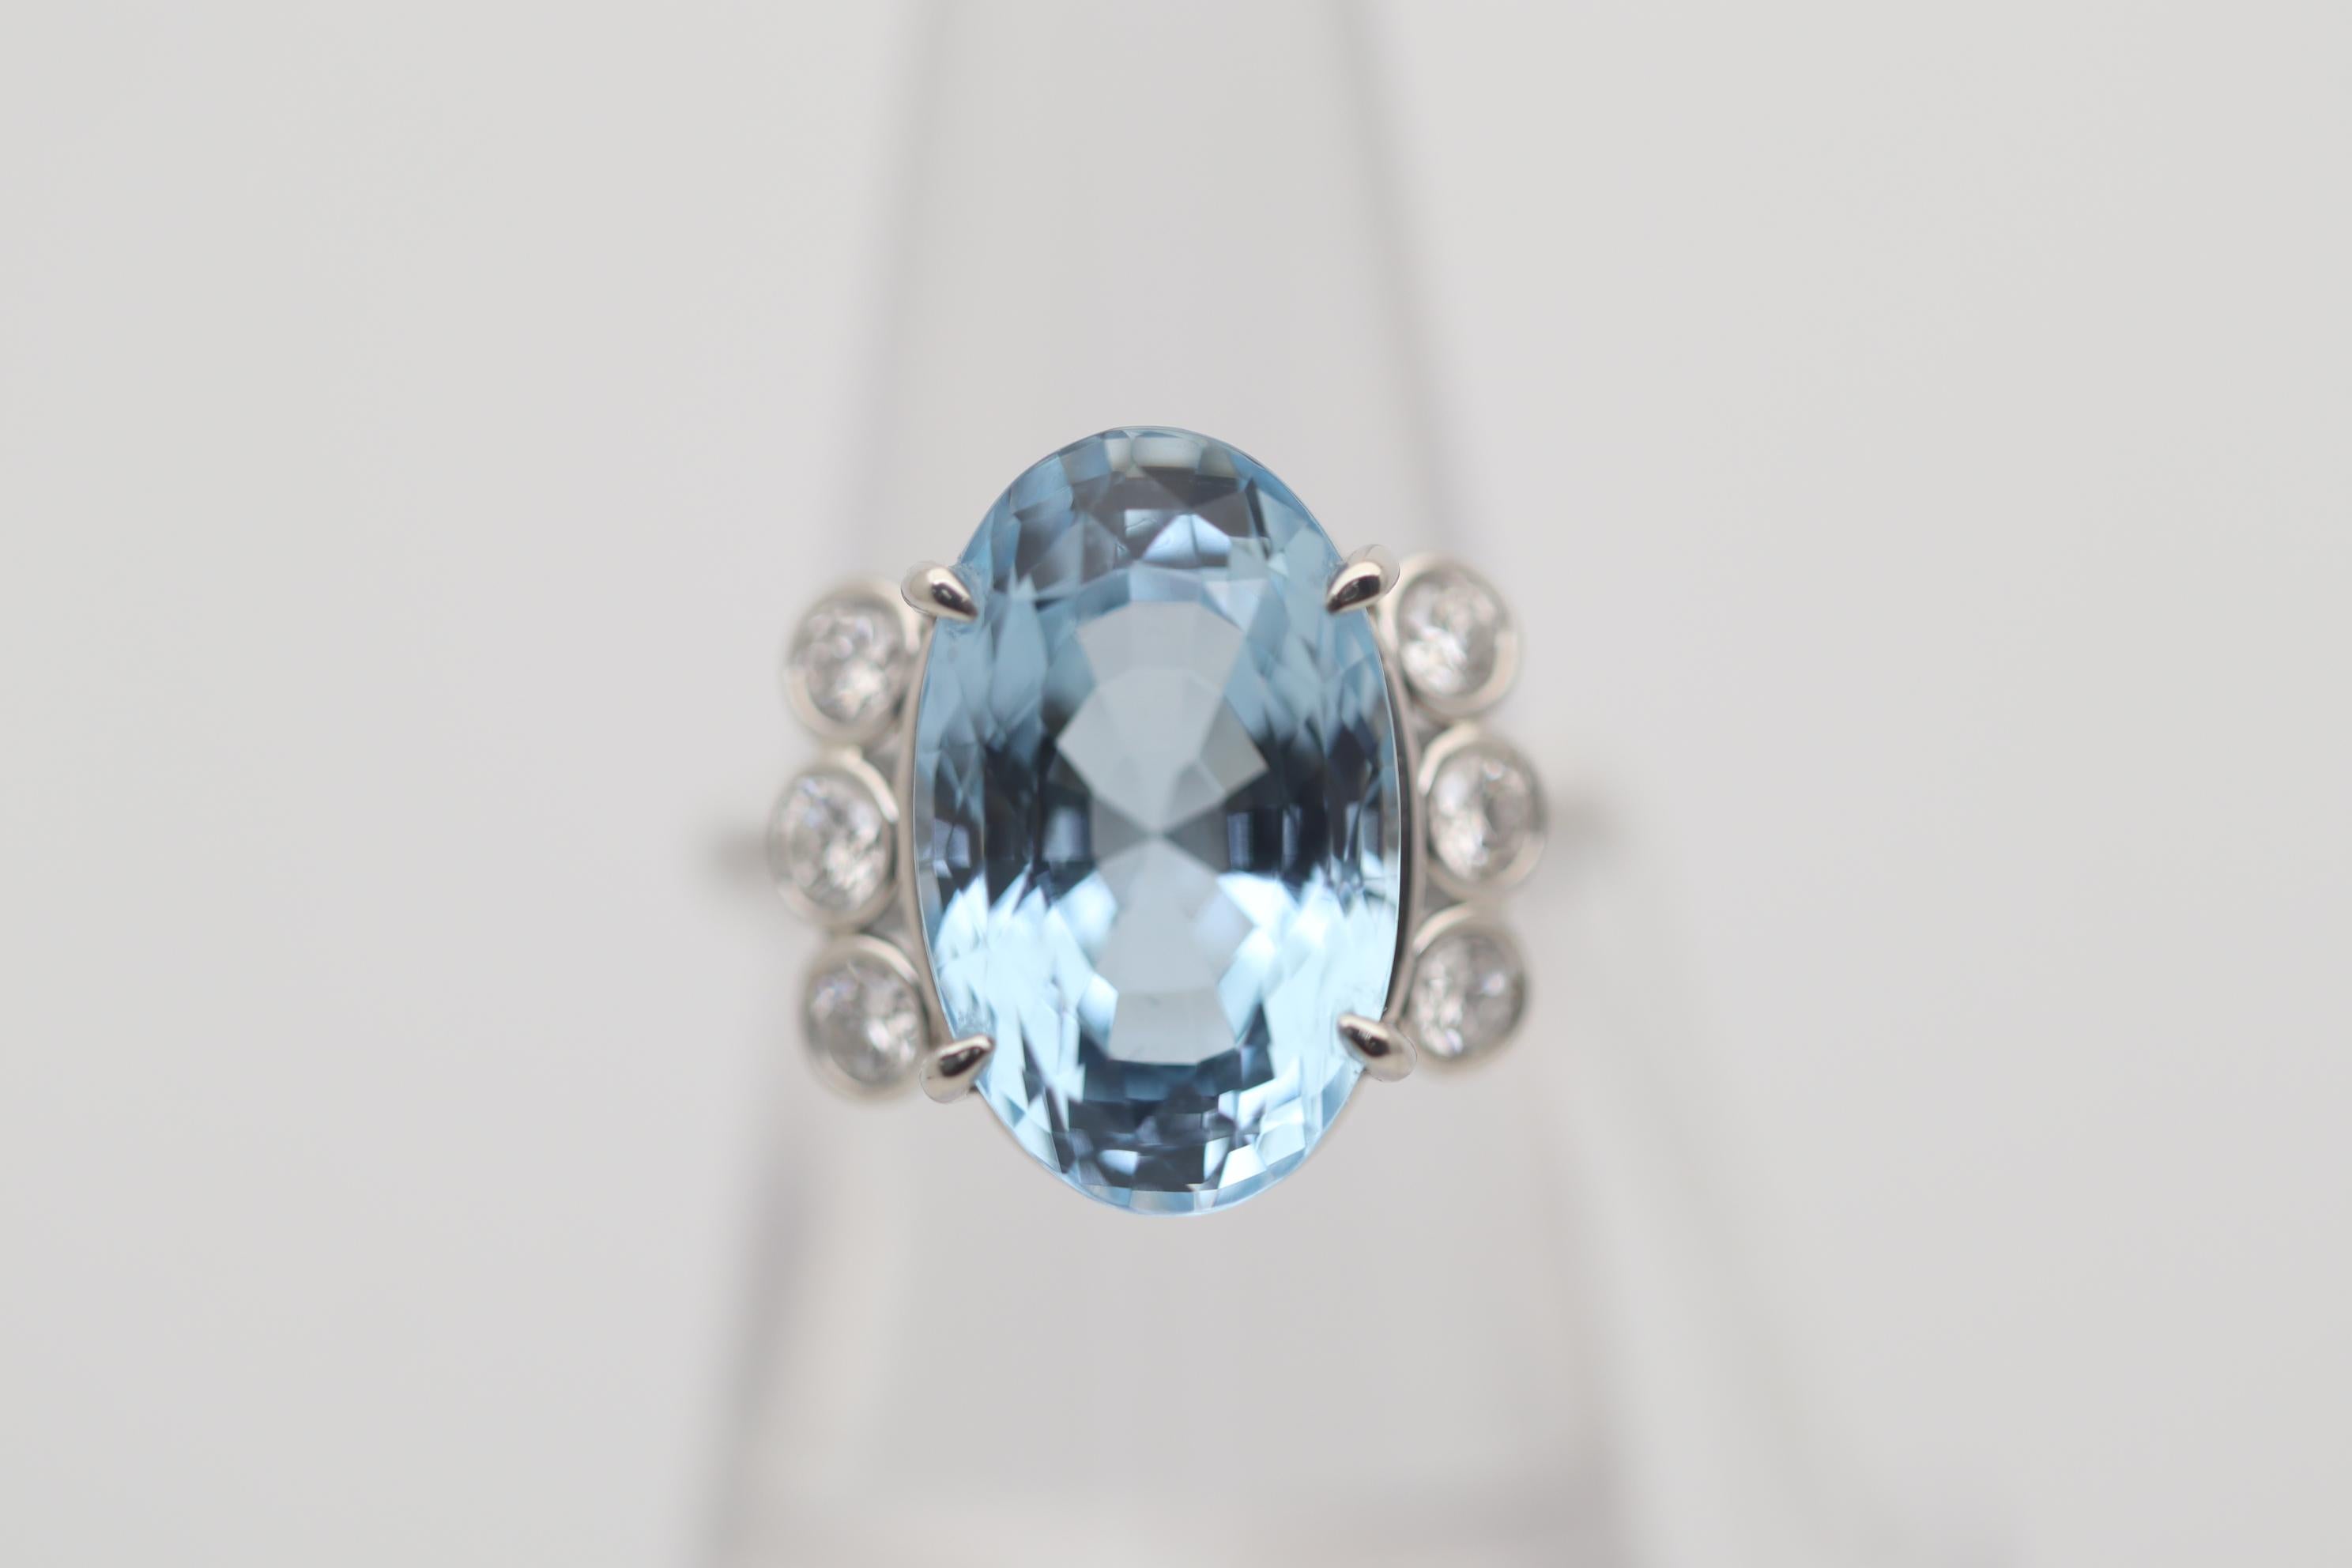 A fine aquamarine weighing 10.96 carats takes center stage of this platinum made ring. The aqua has a bright and lively sea-blue color which is just so pleasing to the eye. It is complemented by 6 large round brilliant-cut diamonds, 3 set on each